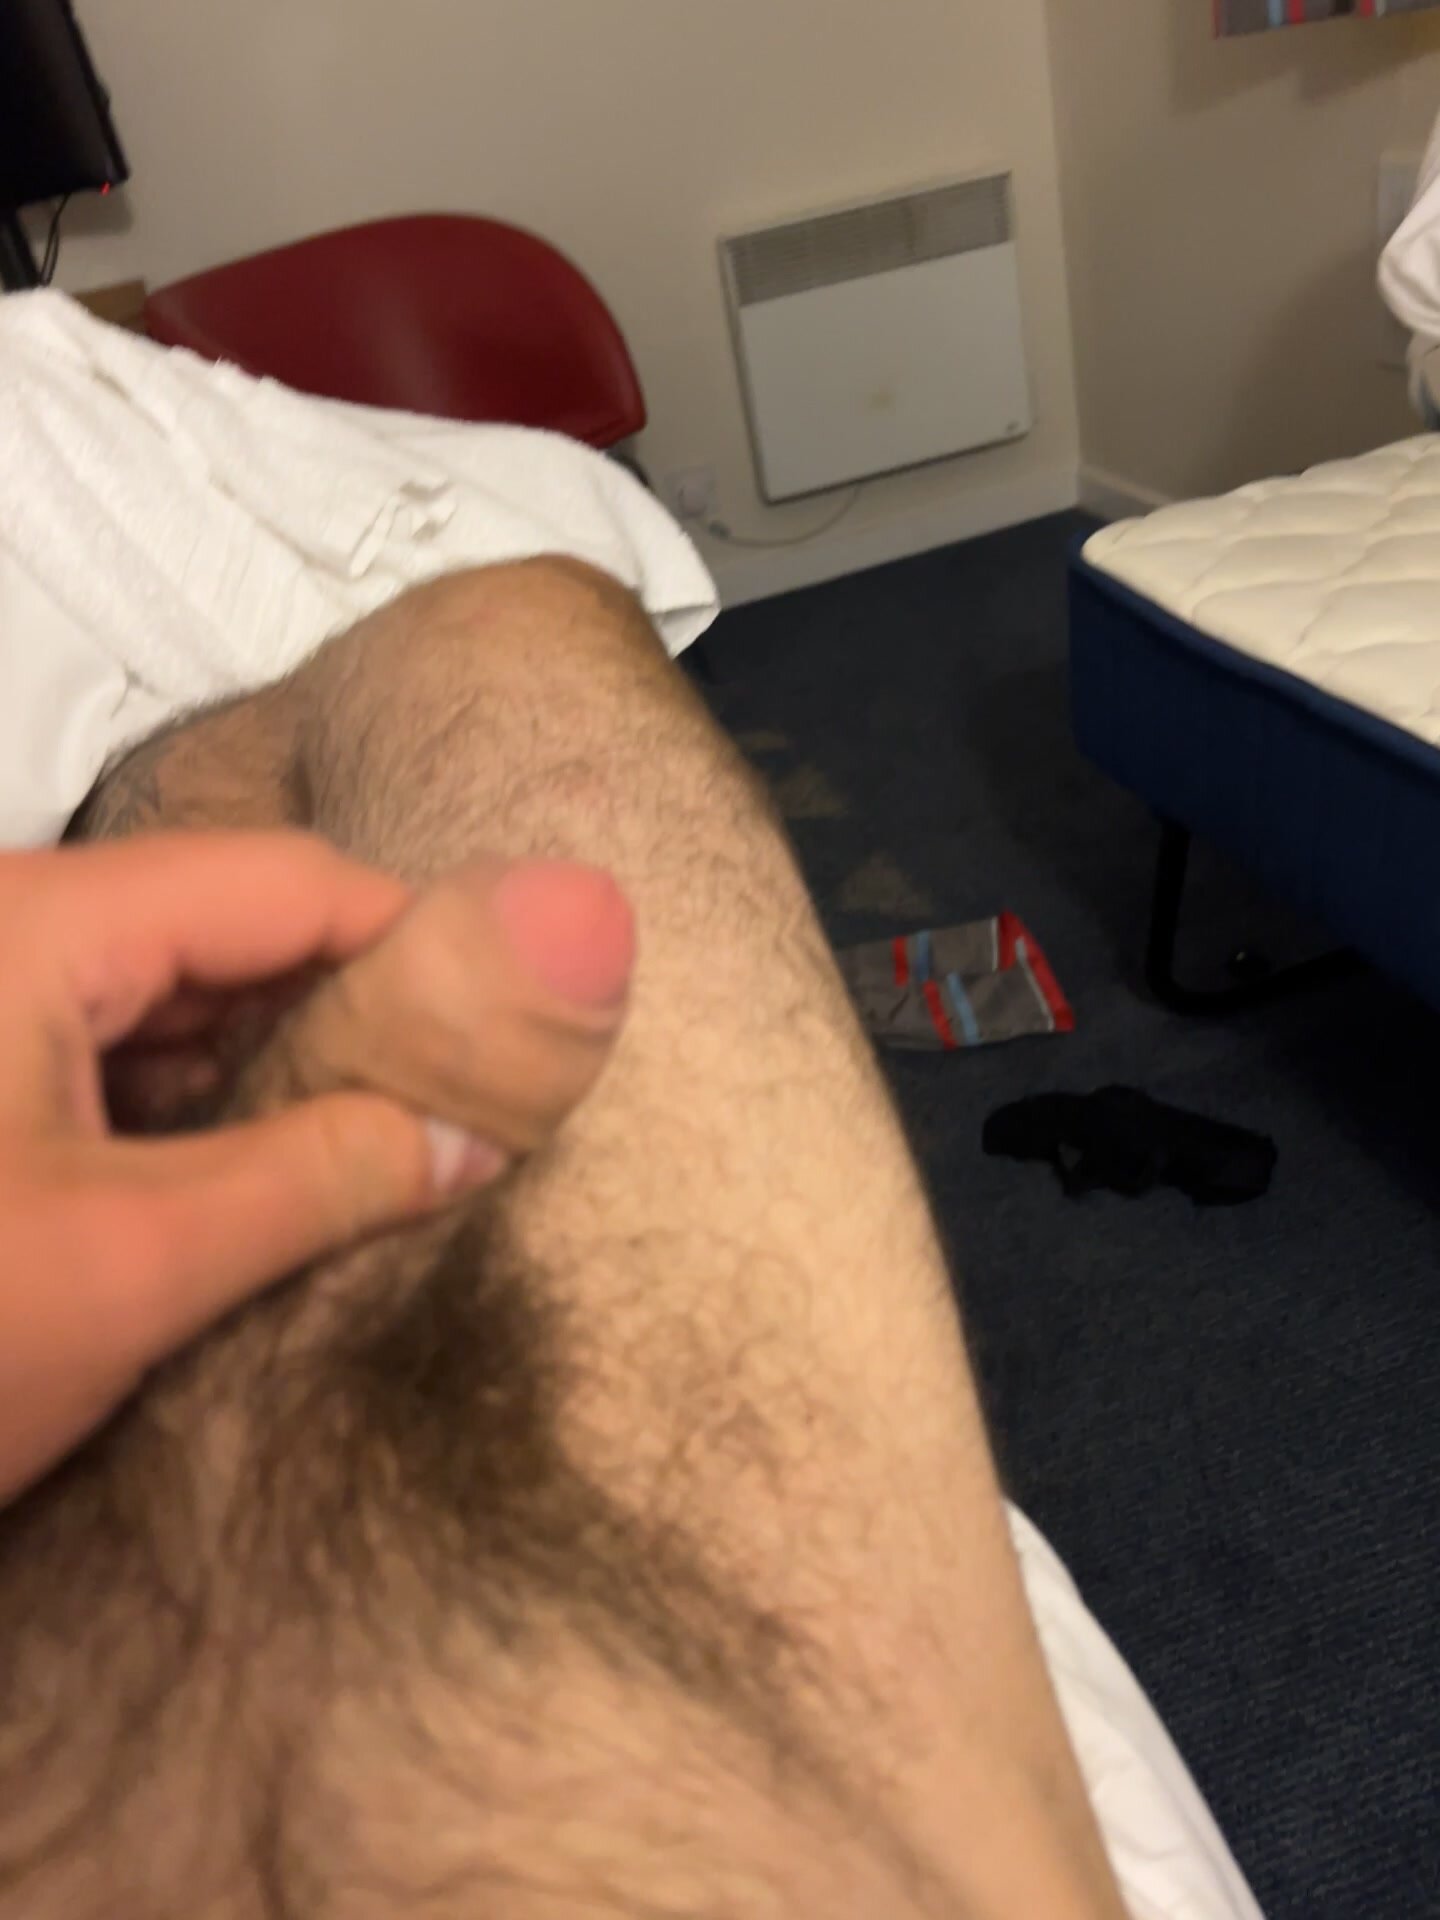 Pissing in hotel room